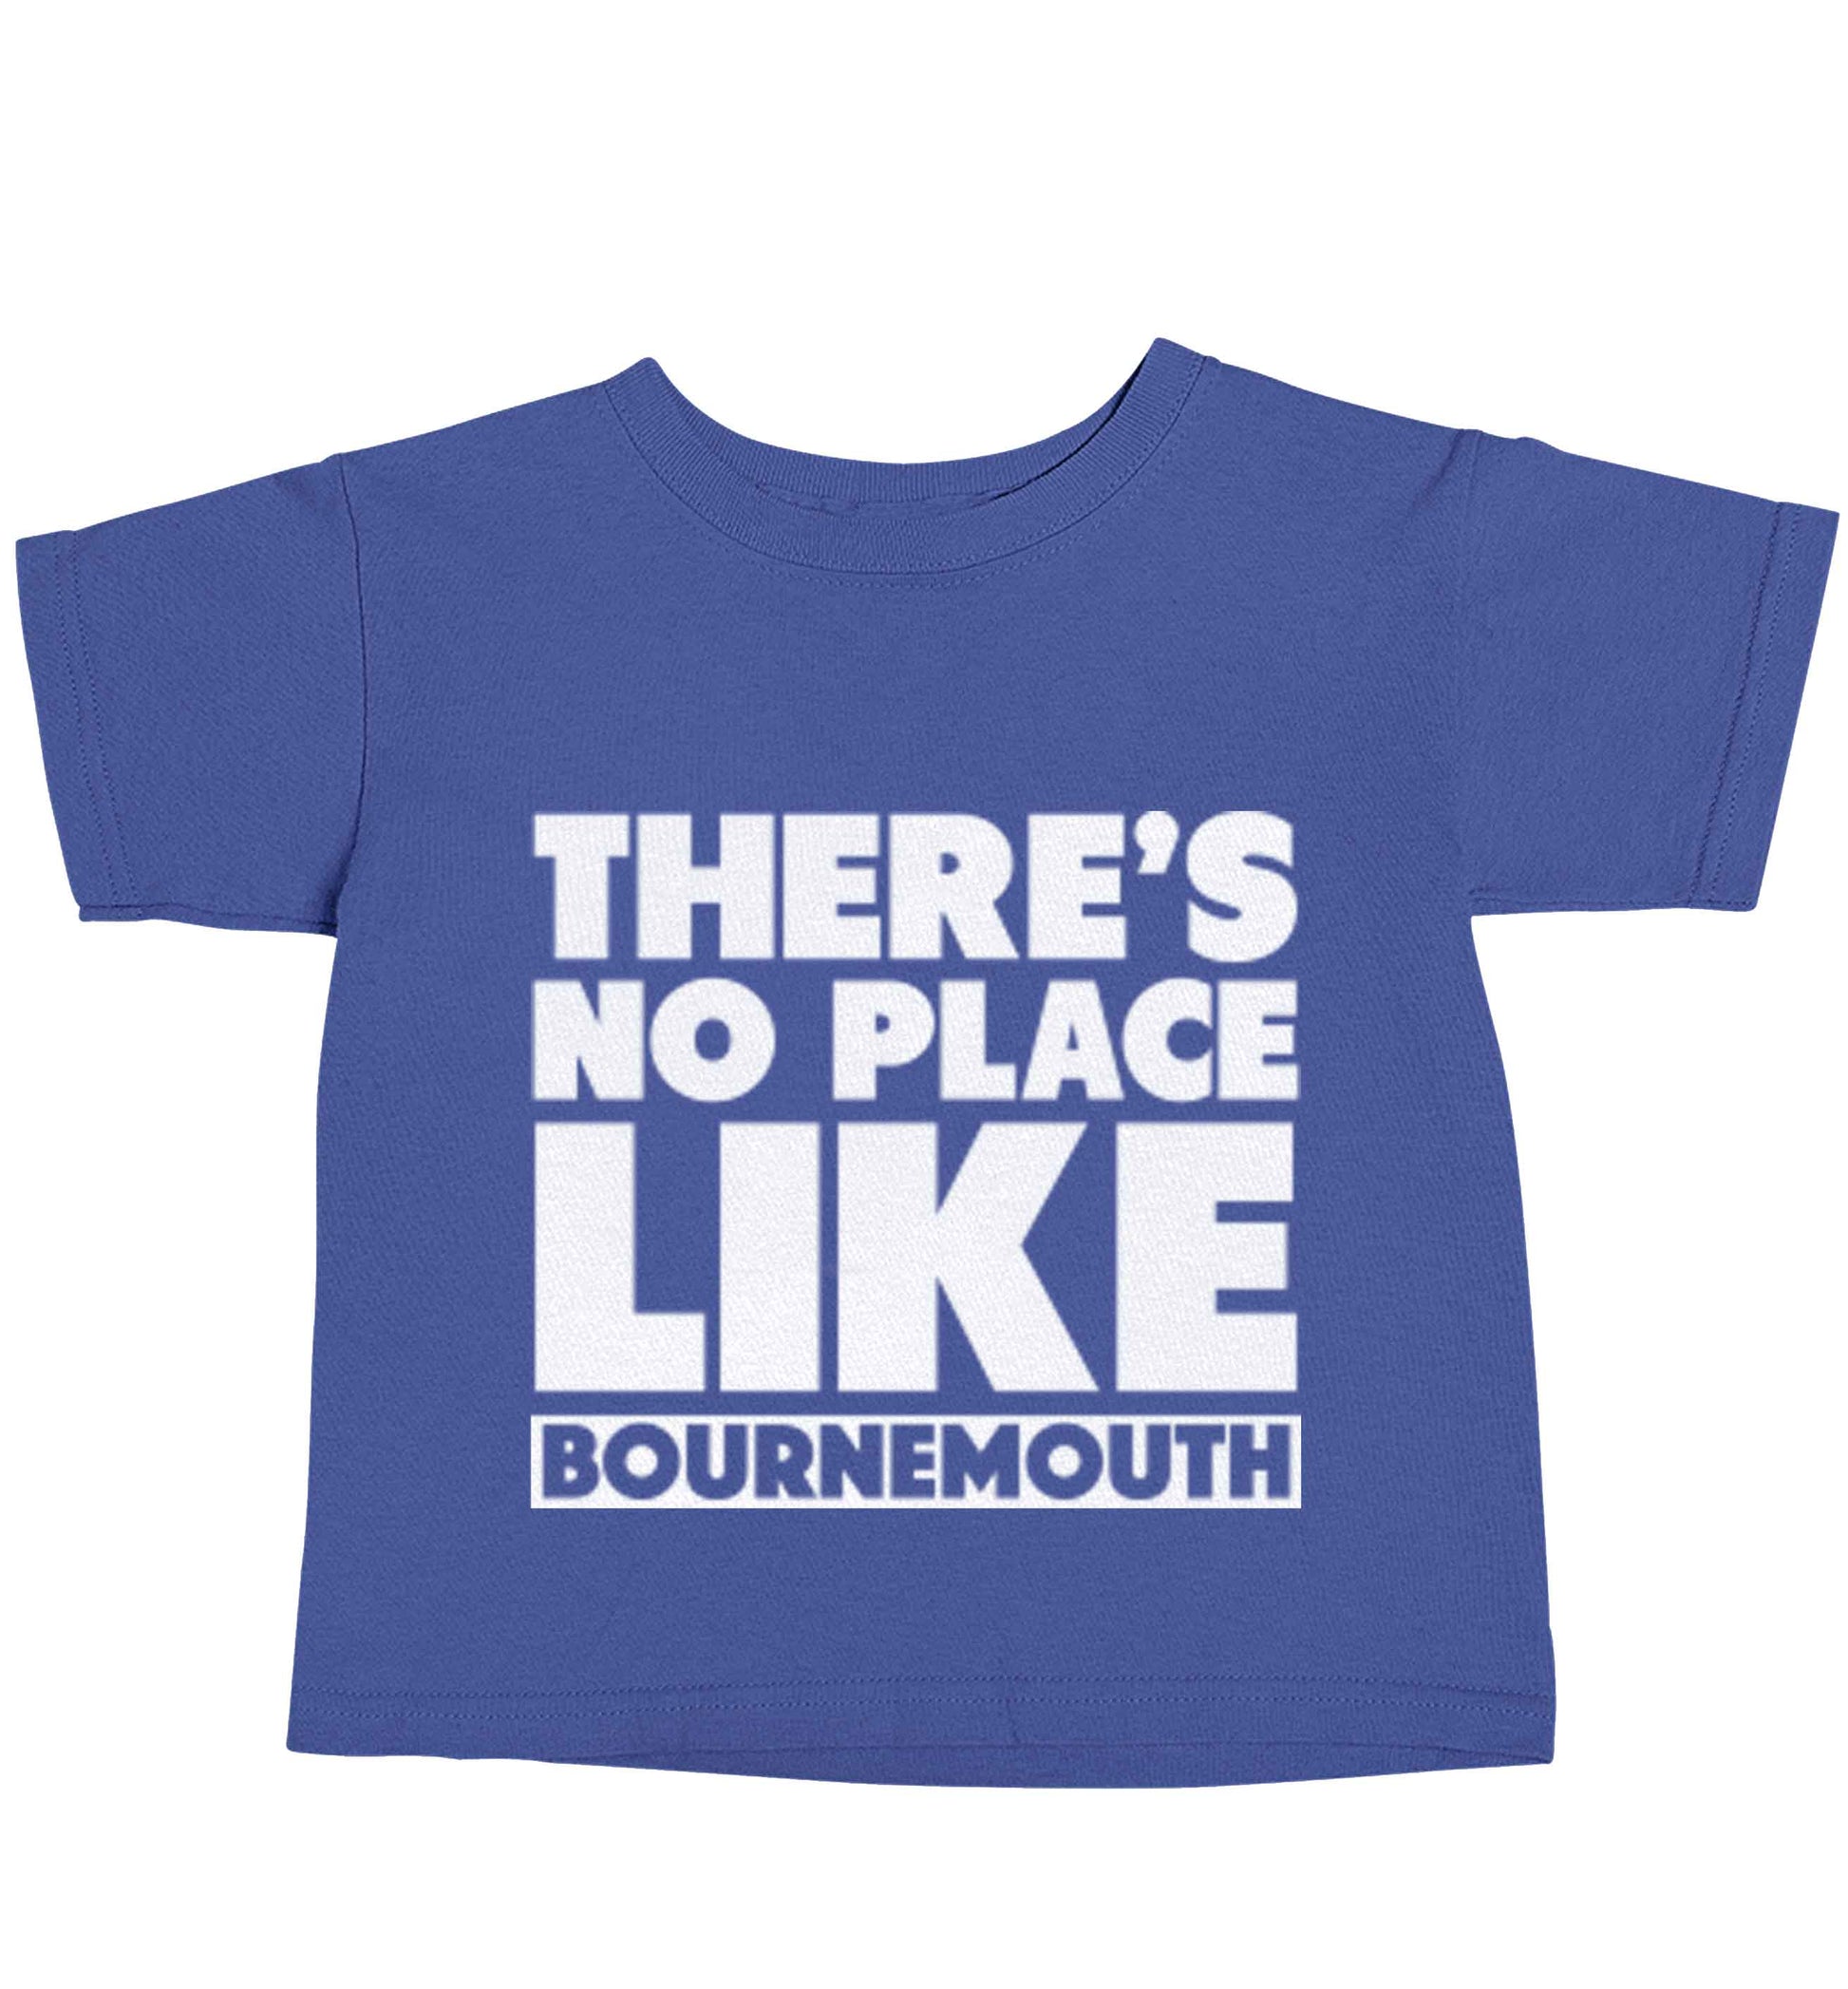 There's no place like Bournemouth blue baby toddler Tshirt 2 Years